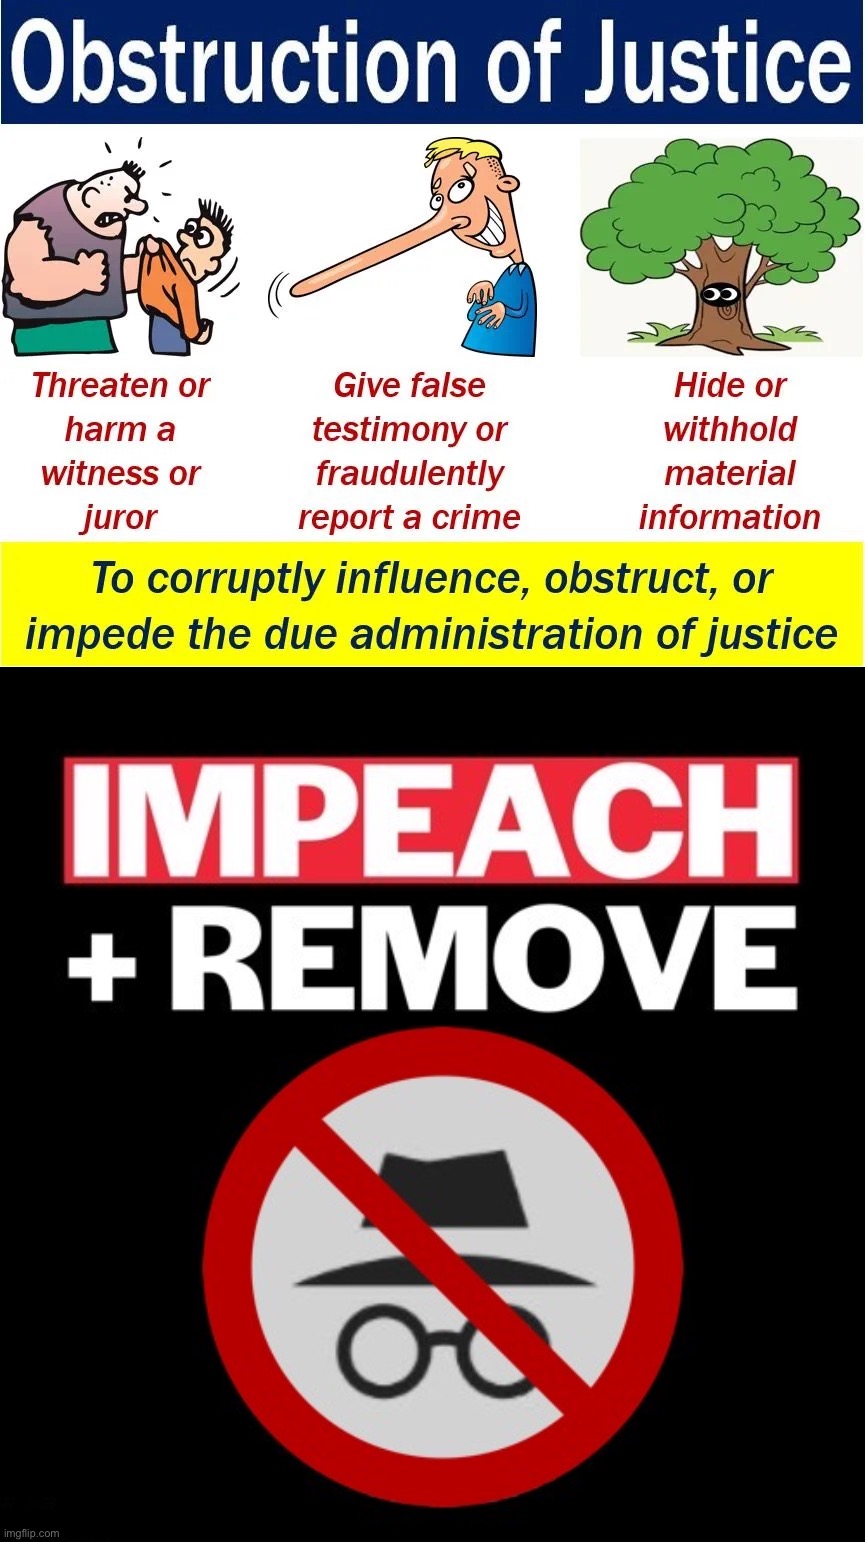 Random images I have in my downloads, pt. 4 (not sure what this one has to do with anything) | image tagged in obstruction of justice,impeach ig,impeach,the,incognito,guy | made w/ Imgflip meme maker